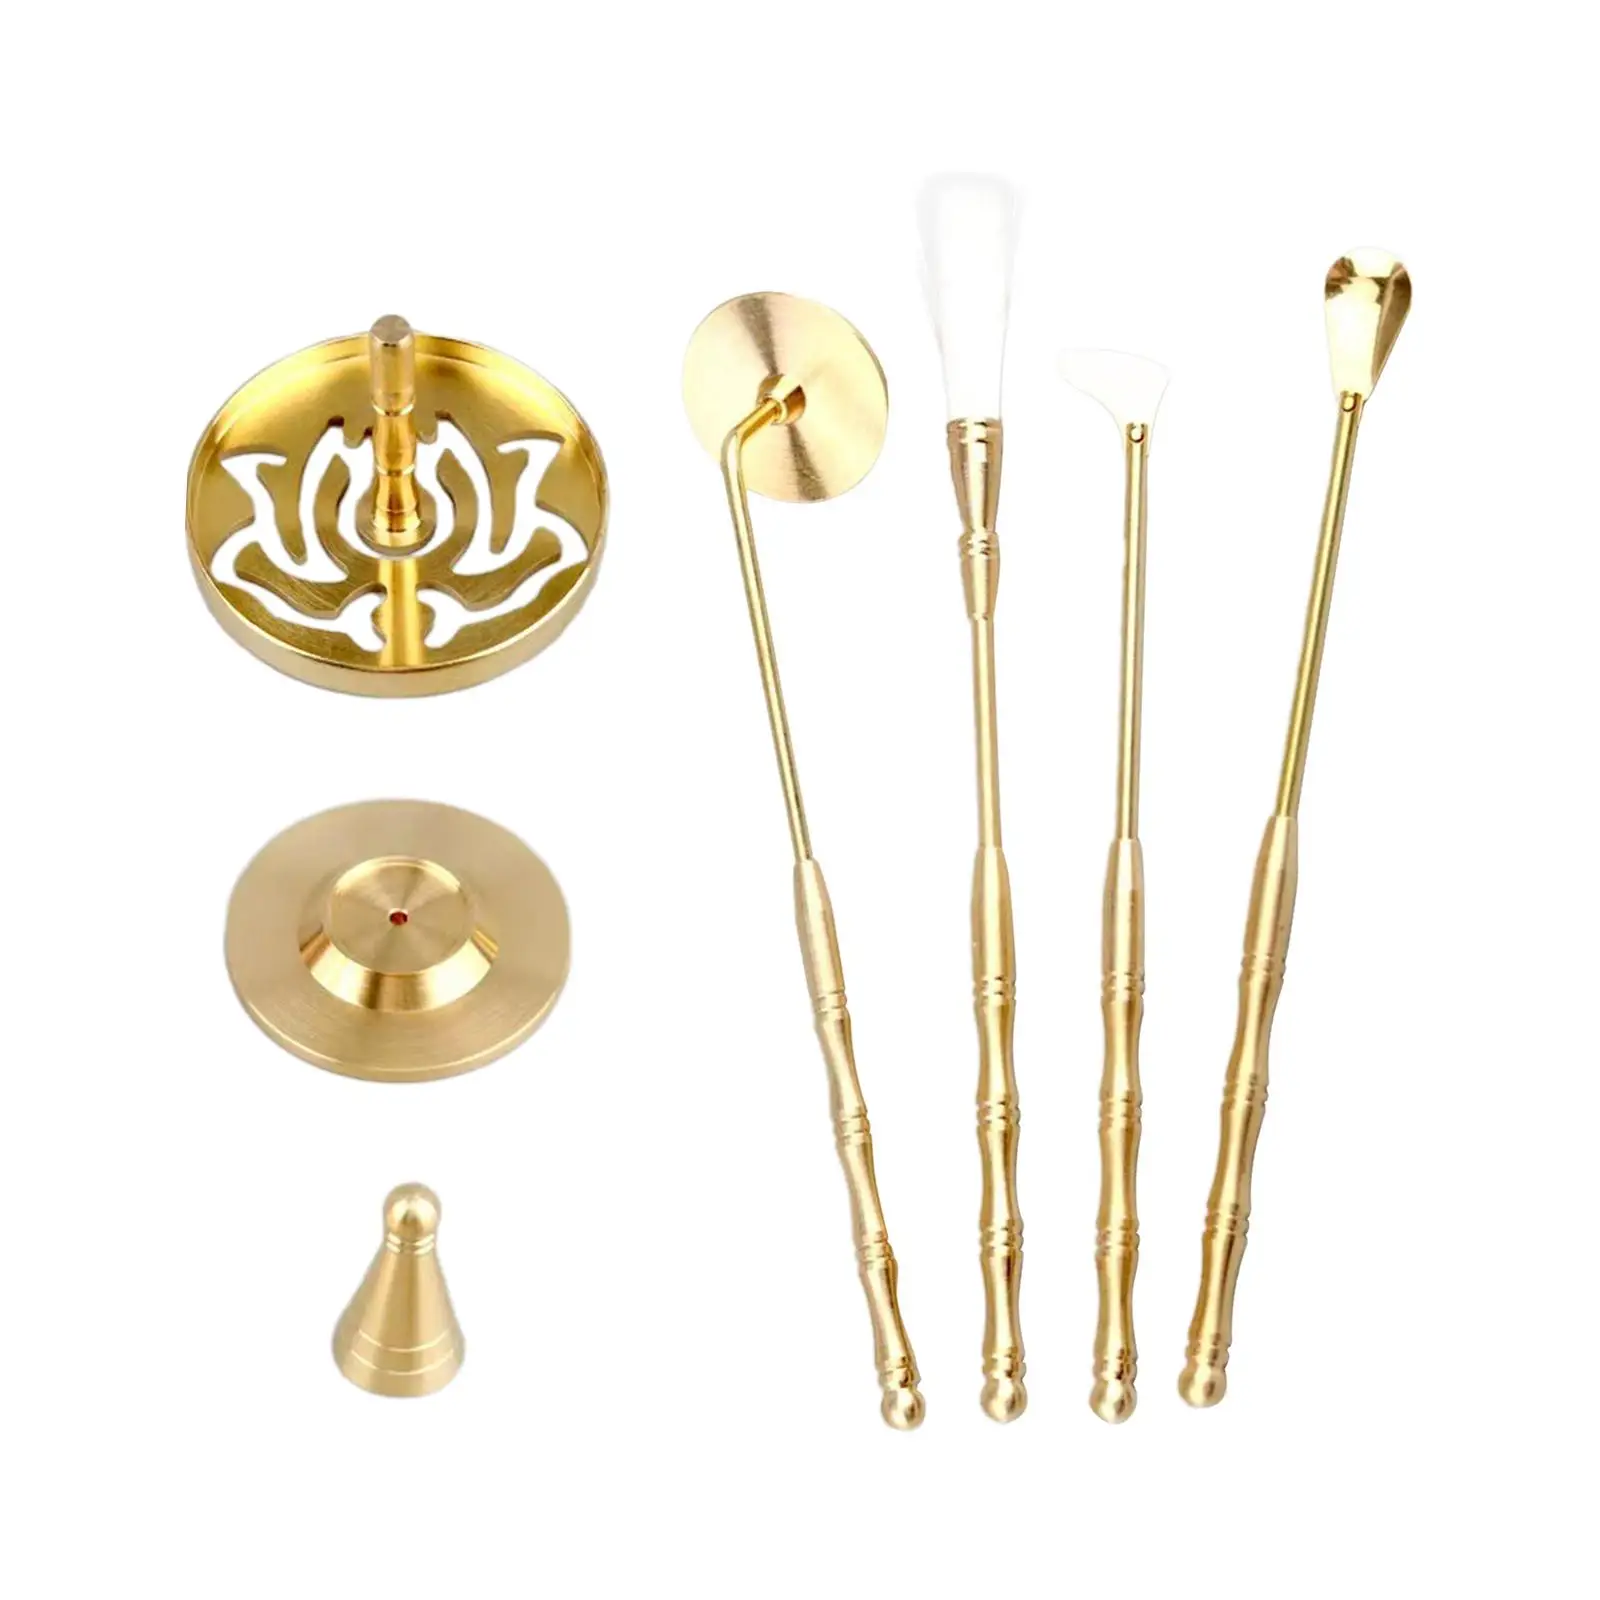 7 Pieces Brass Incense Making Set Incense Spoon Incense Ash Press DIY Incense Fragrance Accessories Chinese Incense Ceremony Set